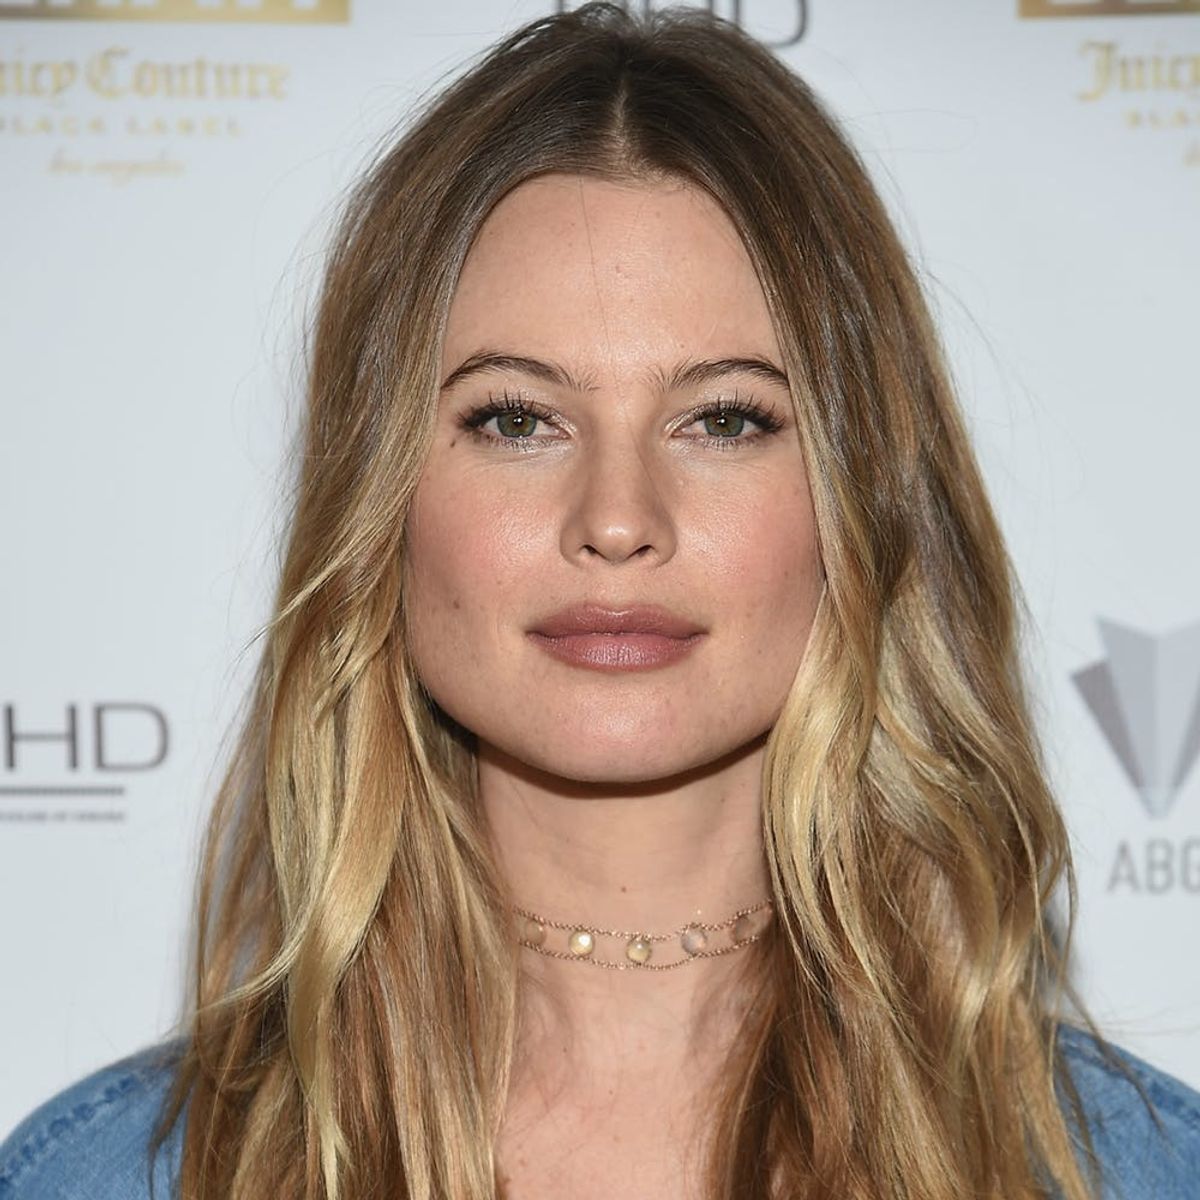 Behati Prinsloo Uses Her Baby Bump As a Floatation Device in This Hilarious Snap